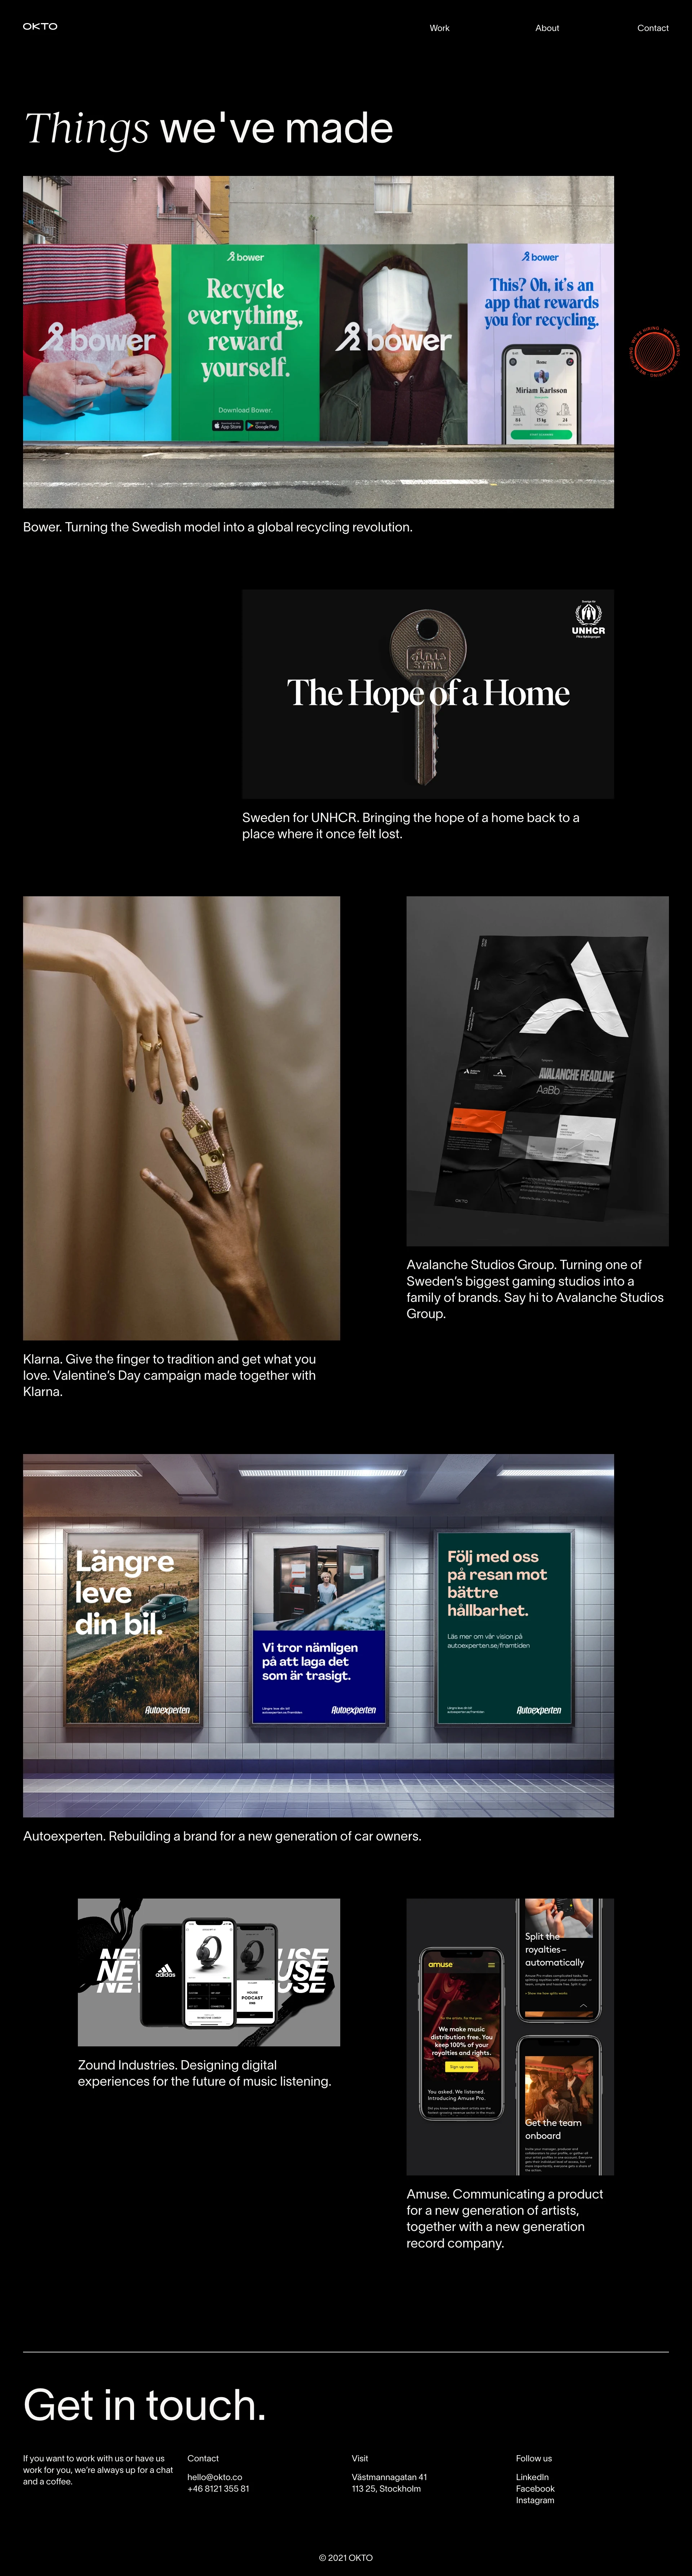 OKTO Landing Page Example: Working in the intersection of brand experience, design and communication, we believe there is more than one way to do things. Think of it as an interdisciplinary approach with a strong digital core, if it helps.